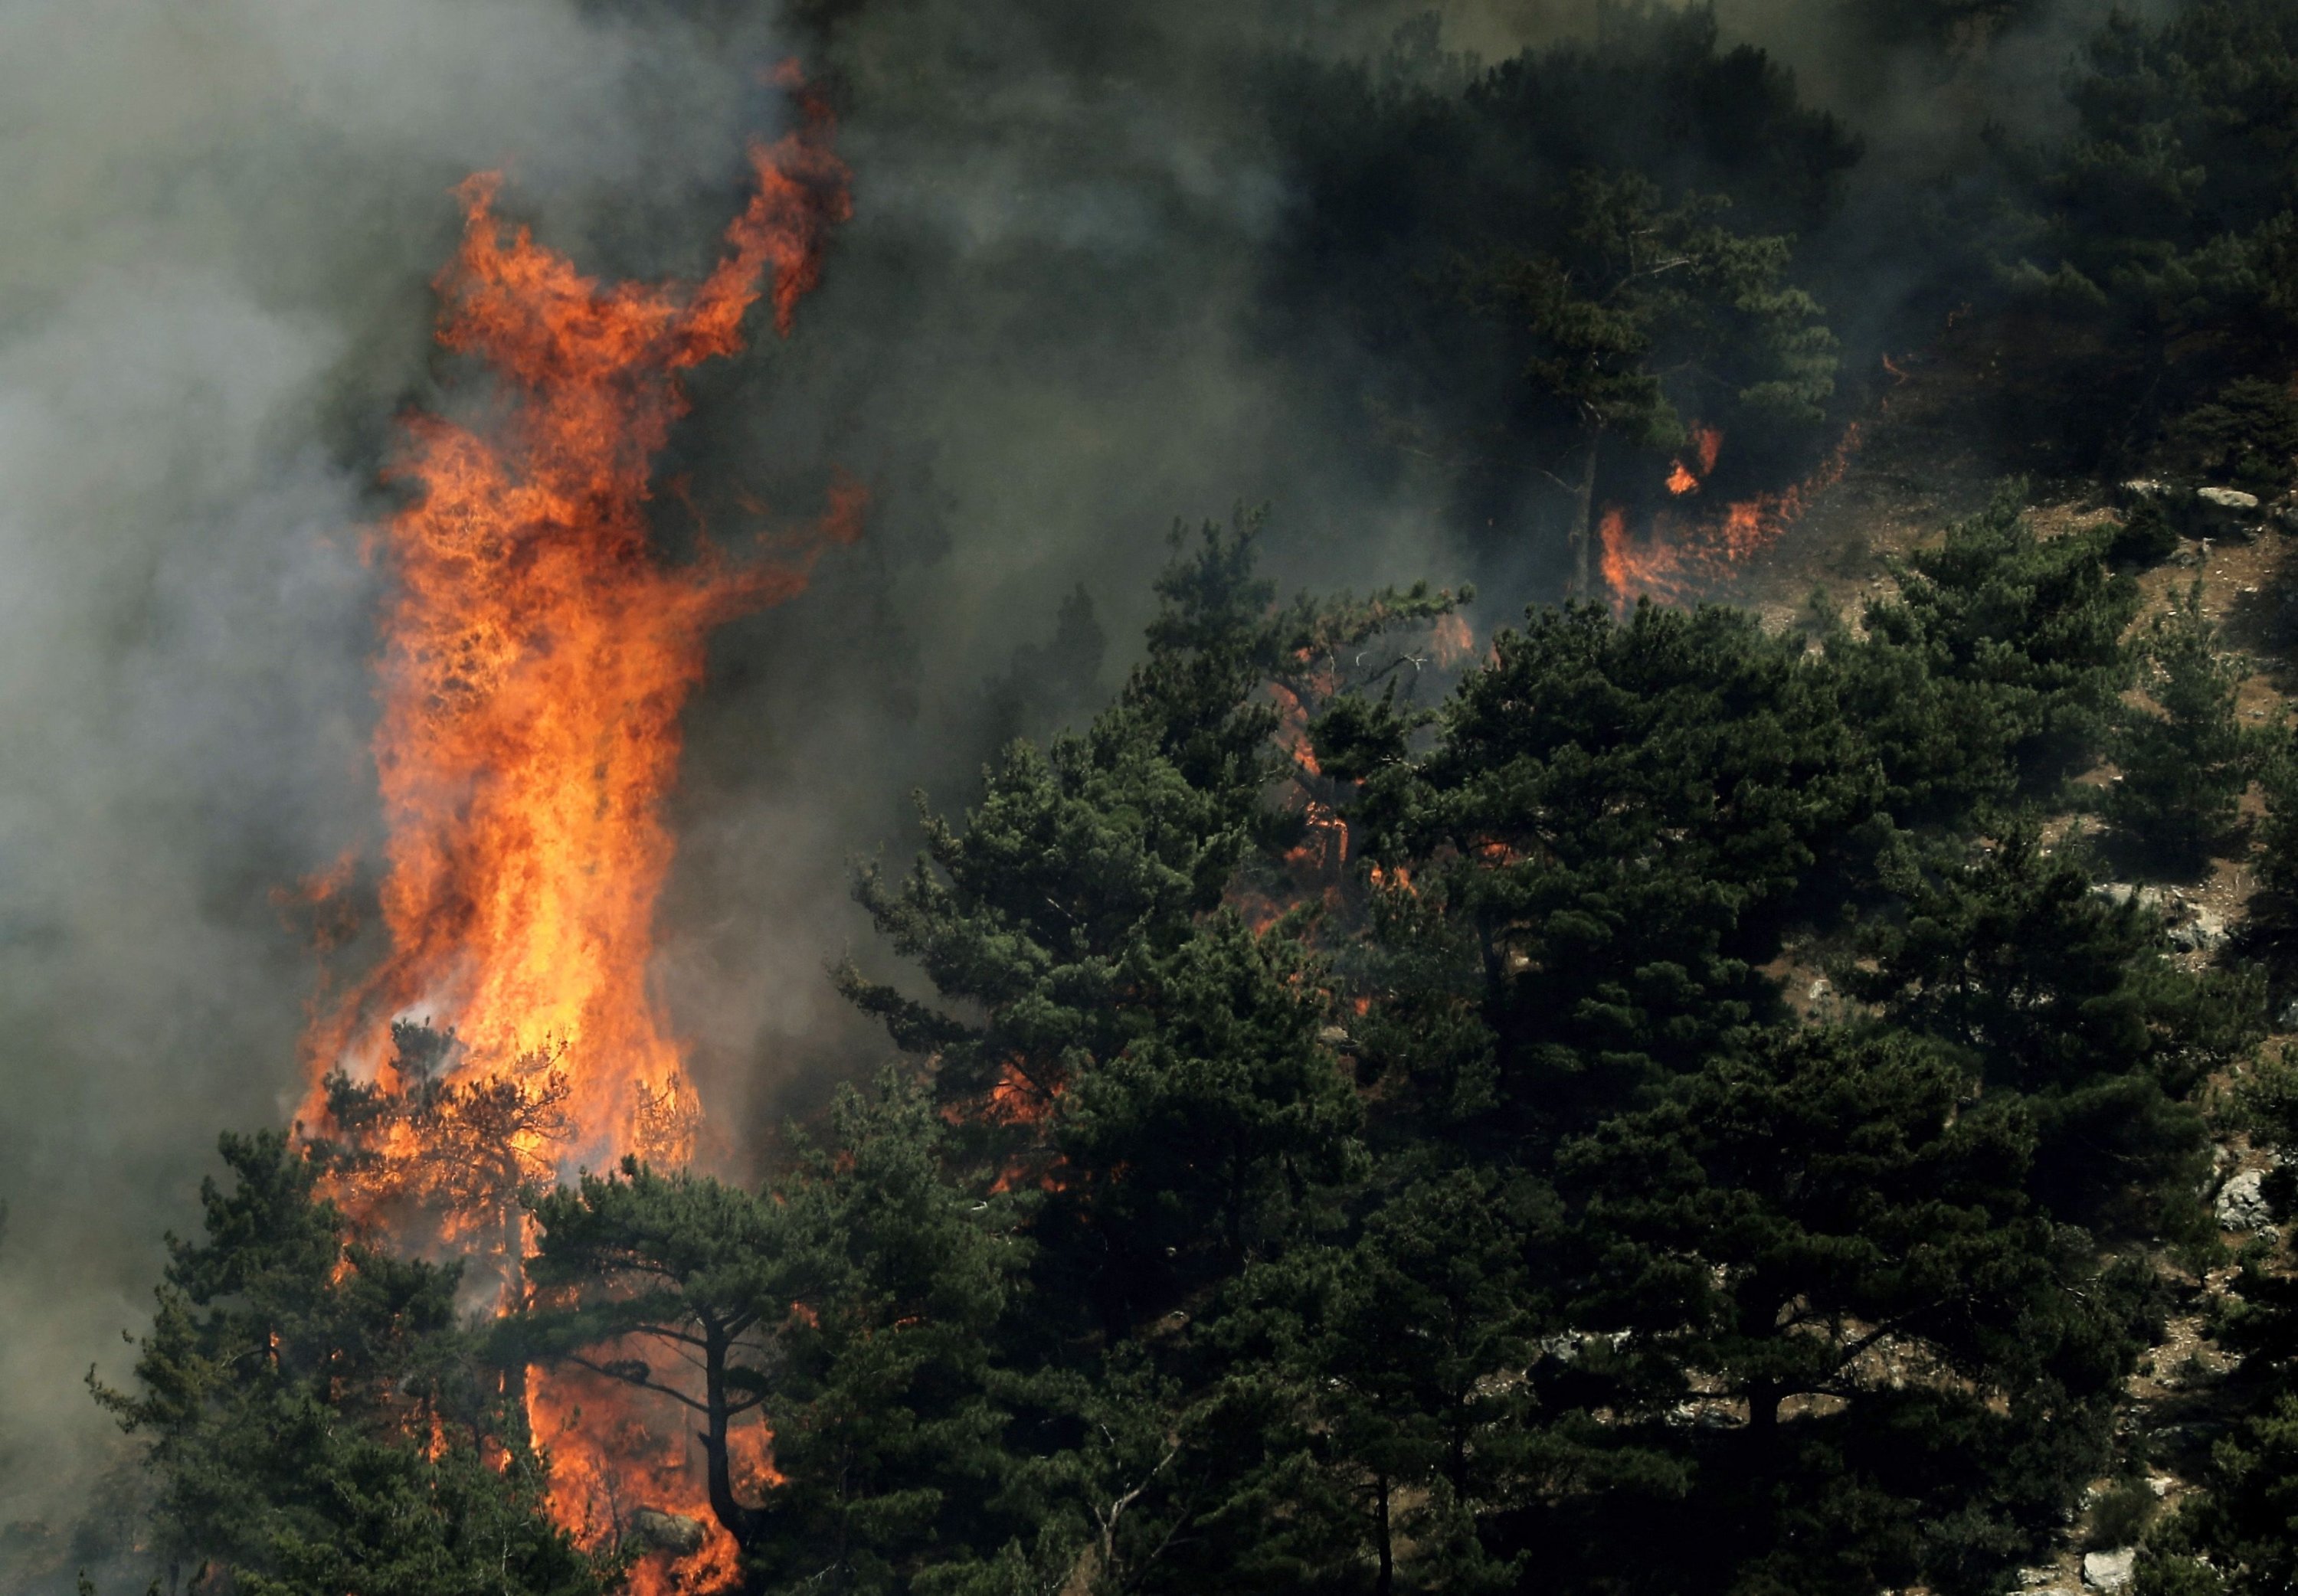  Wildfires spread in the forests of the Qubayyat area in northern Lebanon